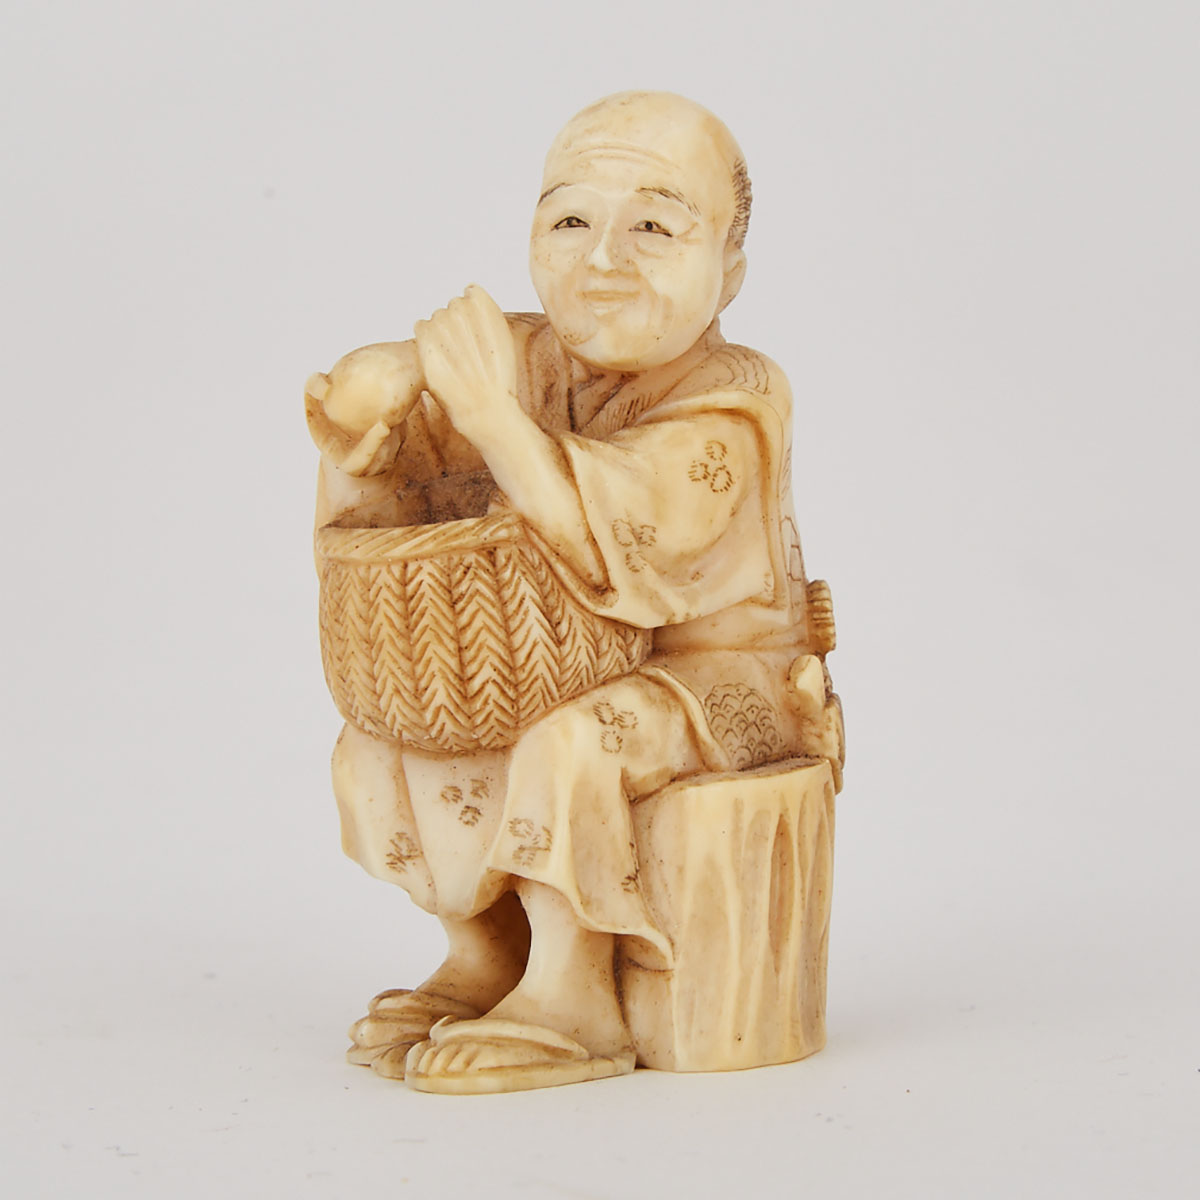 Japanese Carved Ivory Okimono Figure of a Merchant with a Basket and Bottle, early 20th century